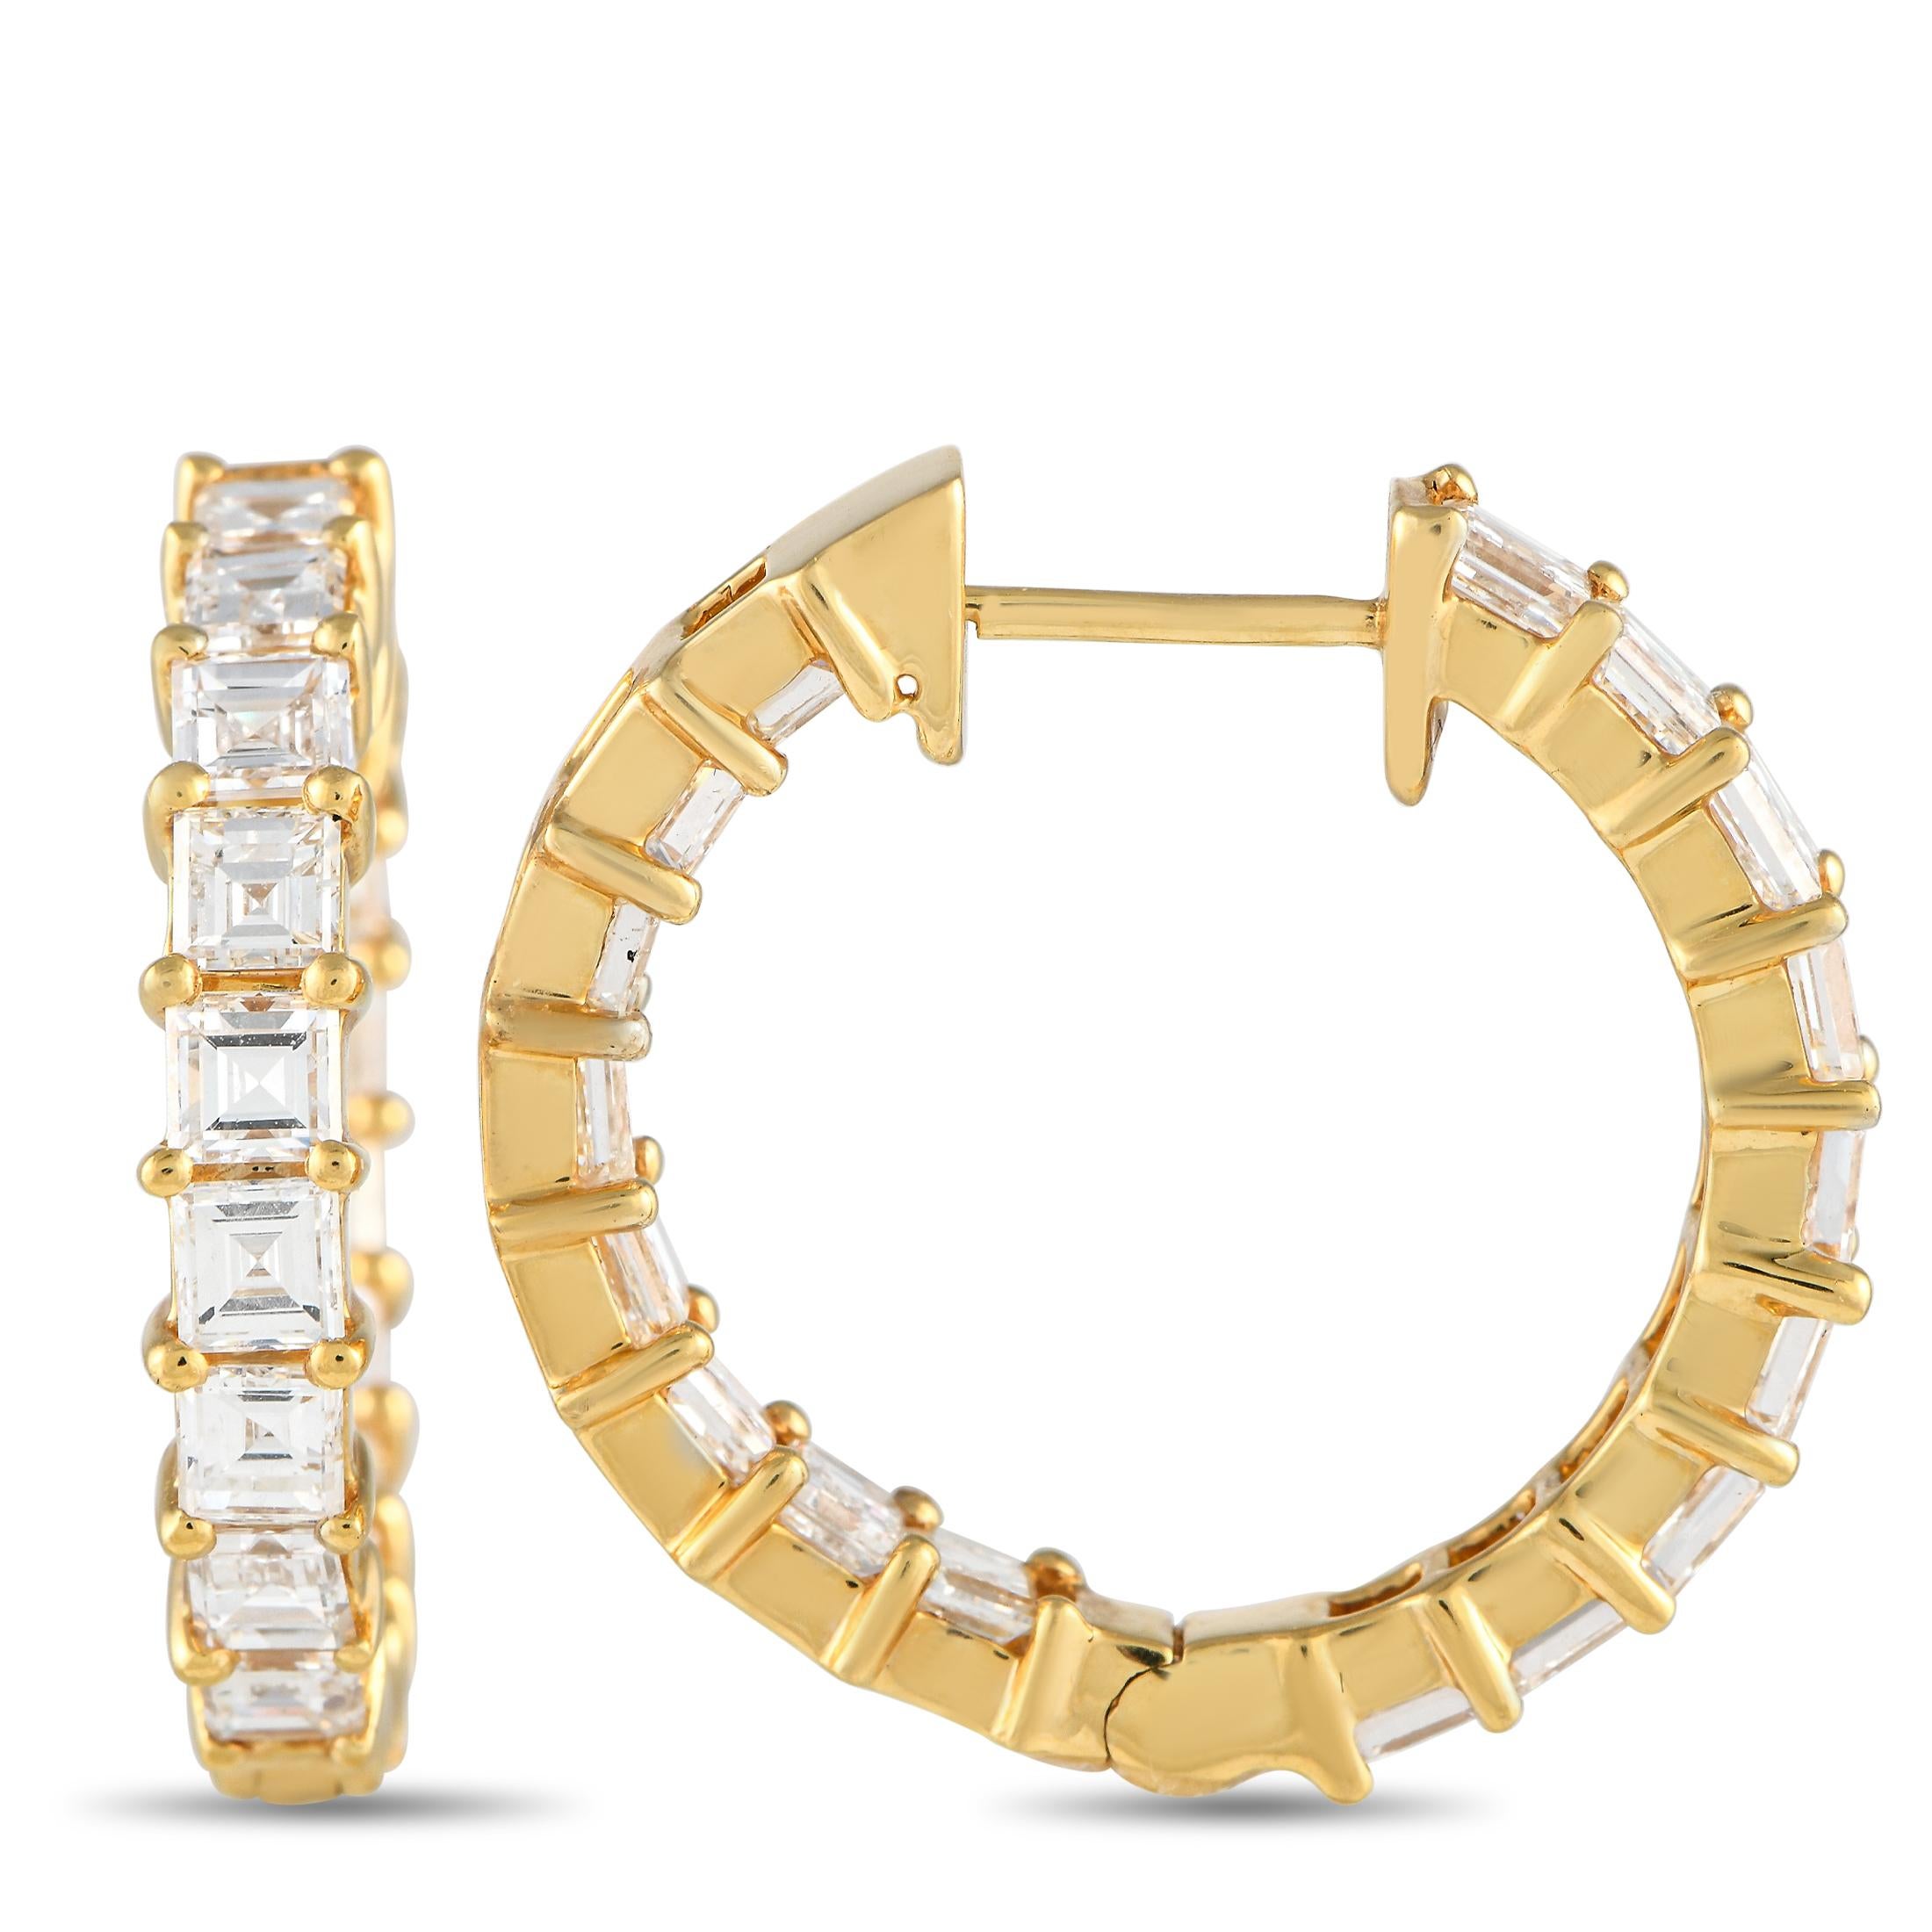 Square-cut diamonds totaling 5.0 carats make these earrings simply unforgettable. Sophisticated and incredibly versatile, each one includes an opulent 18K Yellow Gold setting measuring 1.0” round. 
 
This jewelry piece is offered in brand new